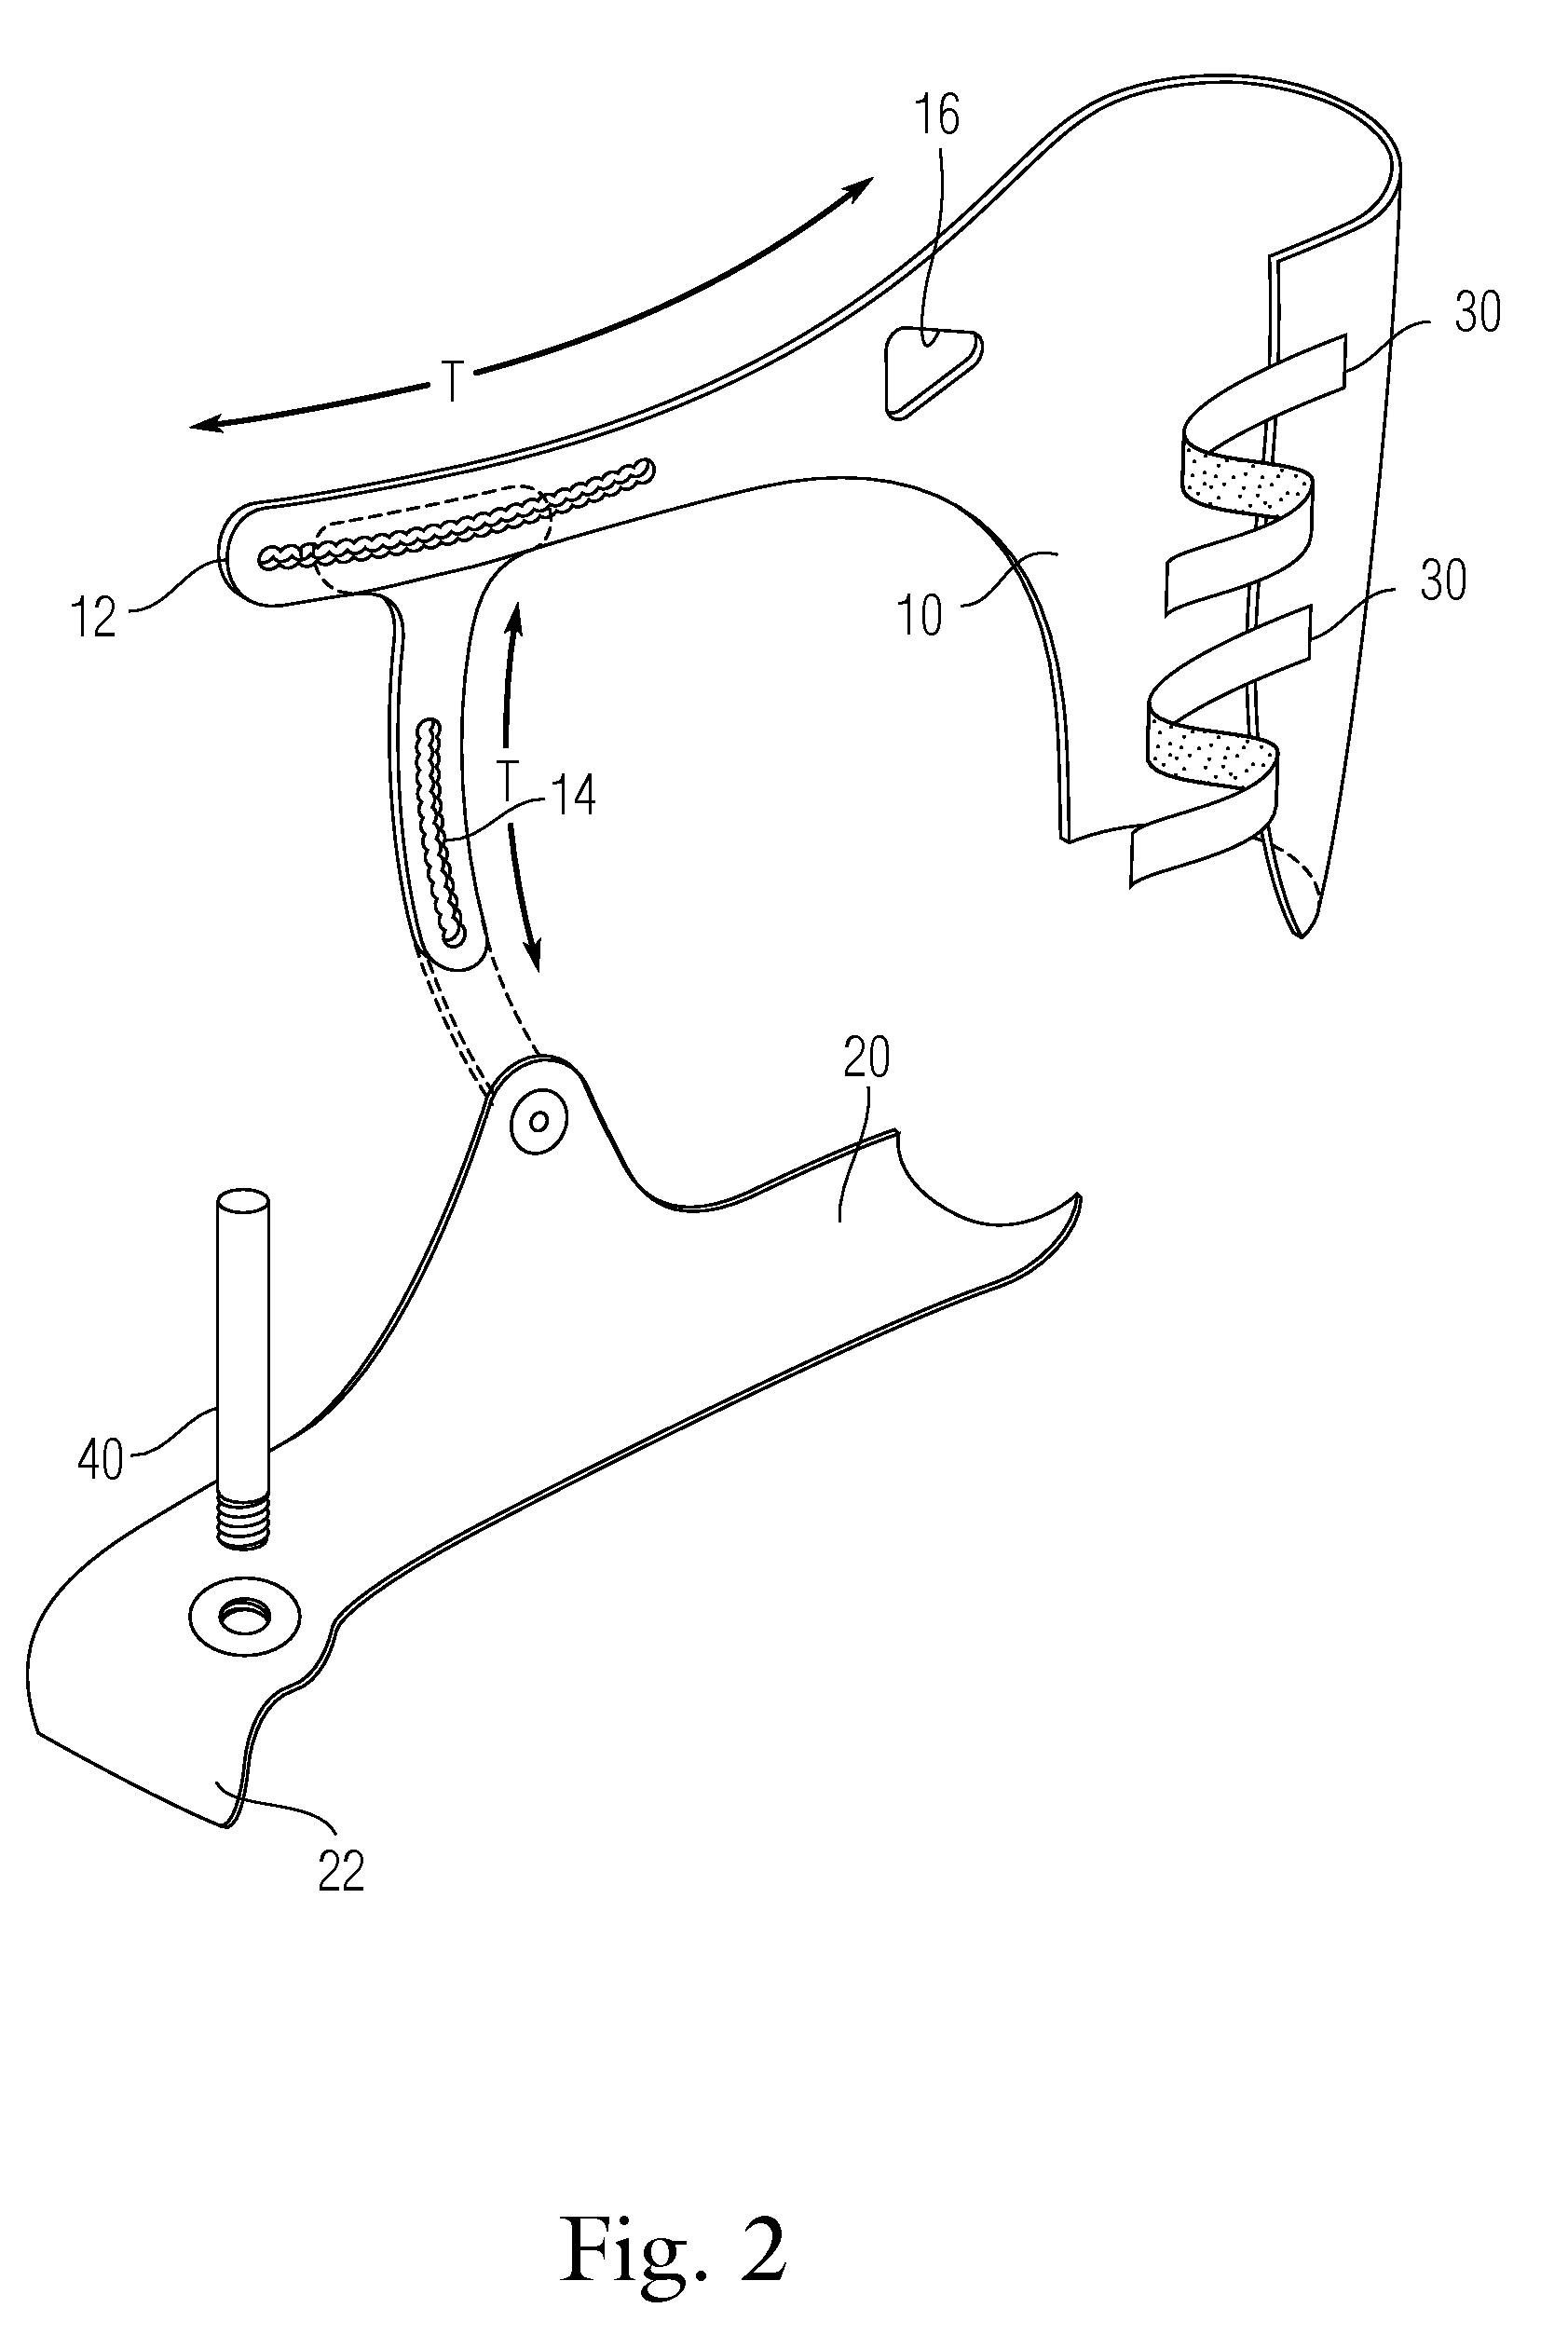 Extremity support apparatus and method